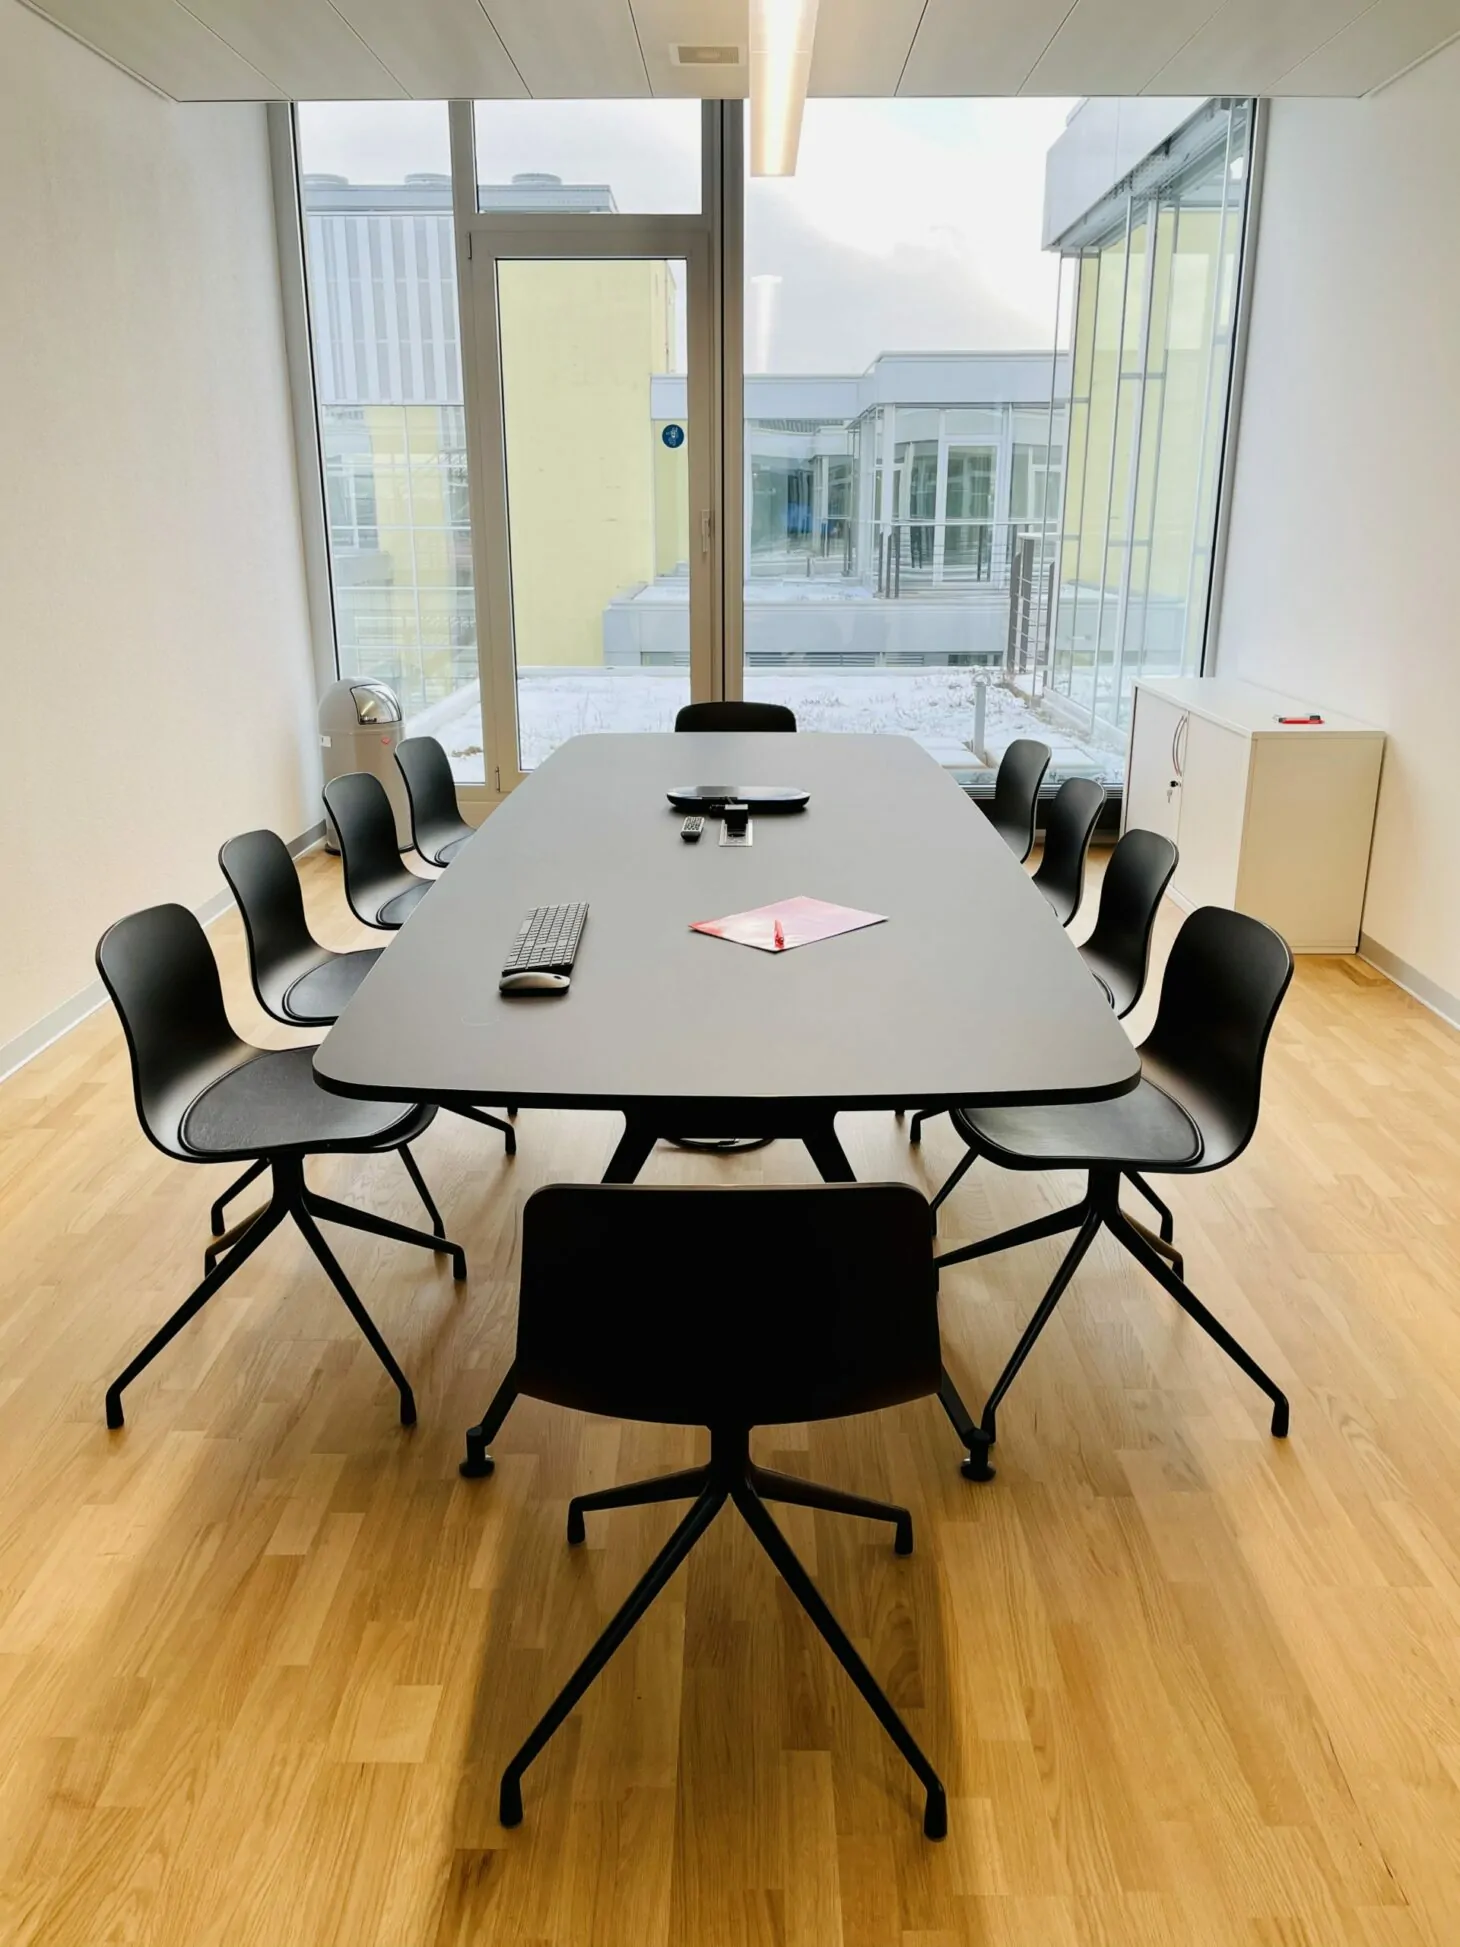 Image of the conference room of the valantic Zurich branch with a view of the window